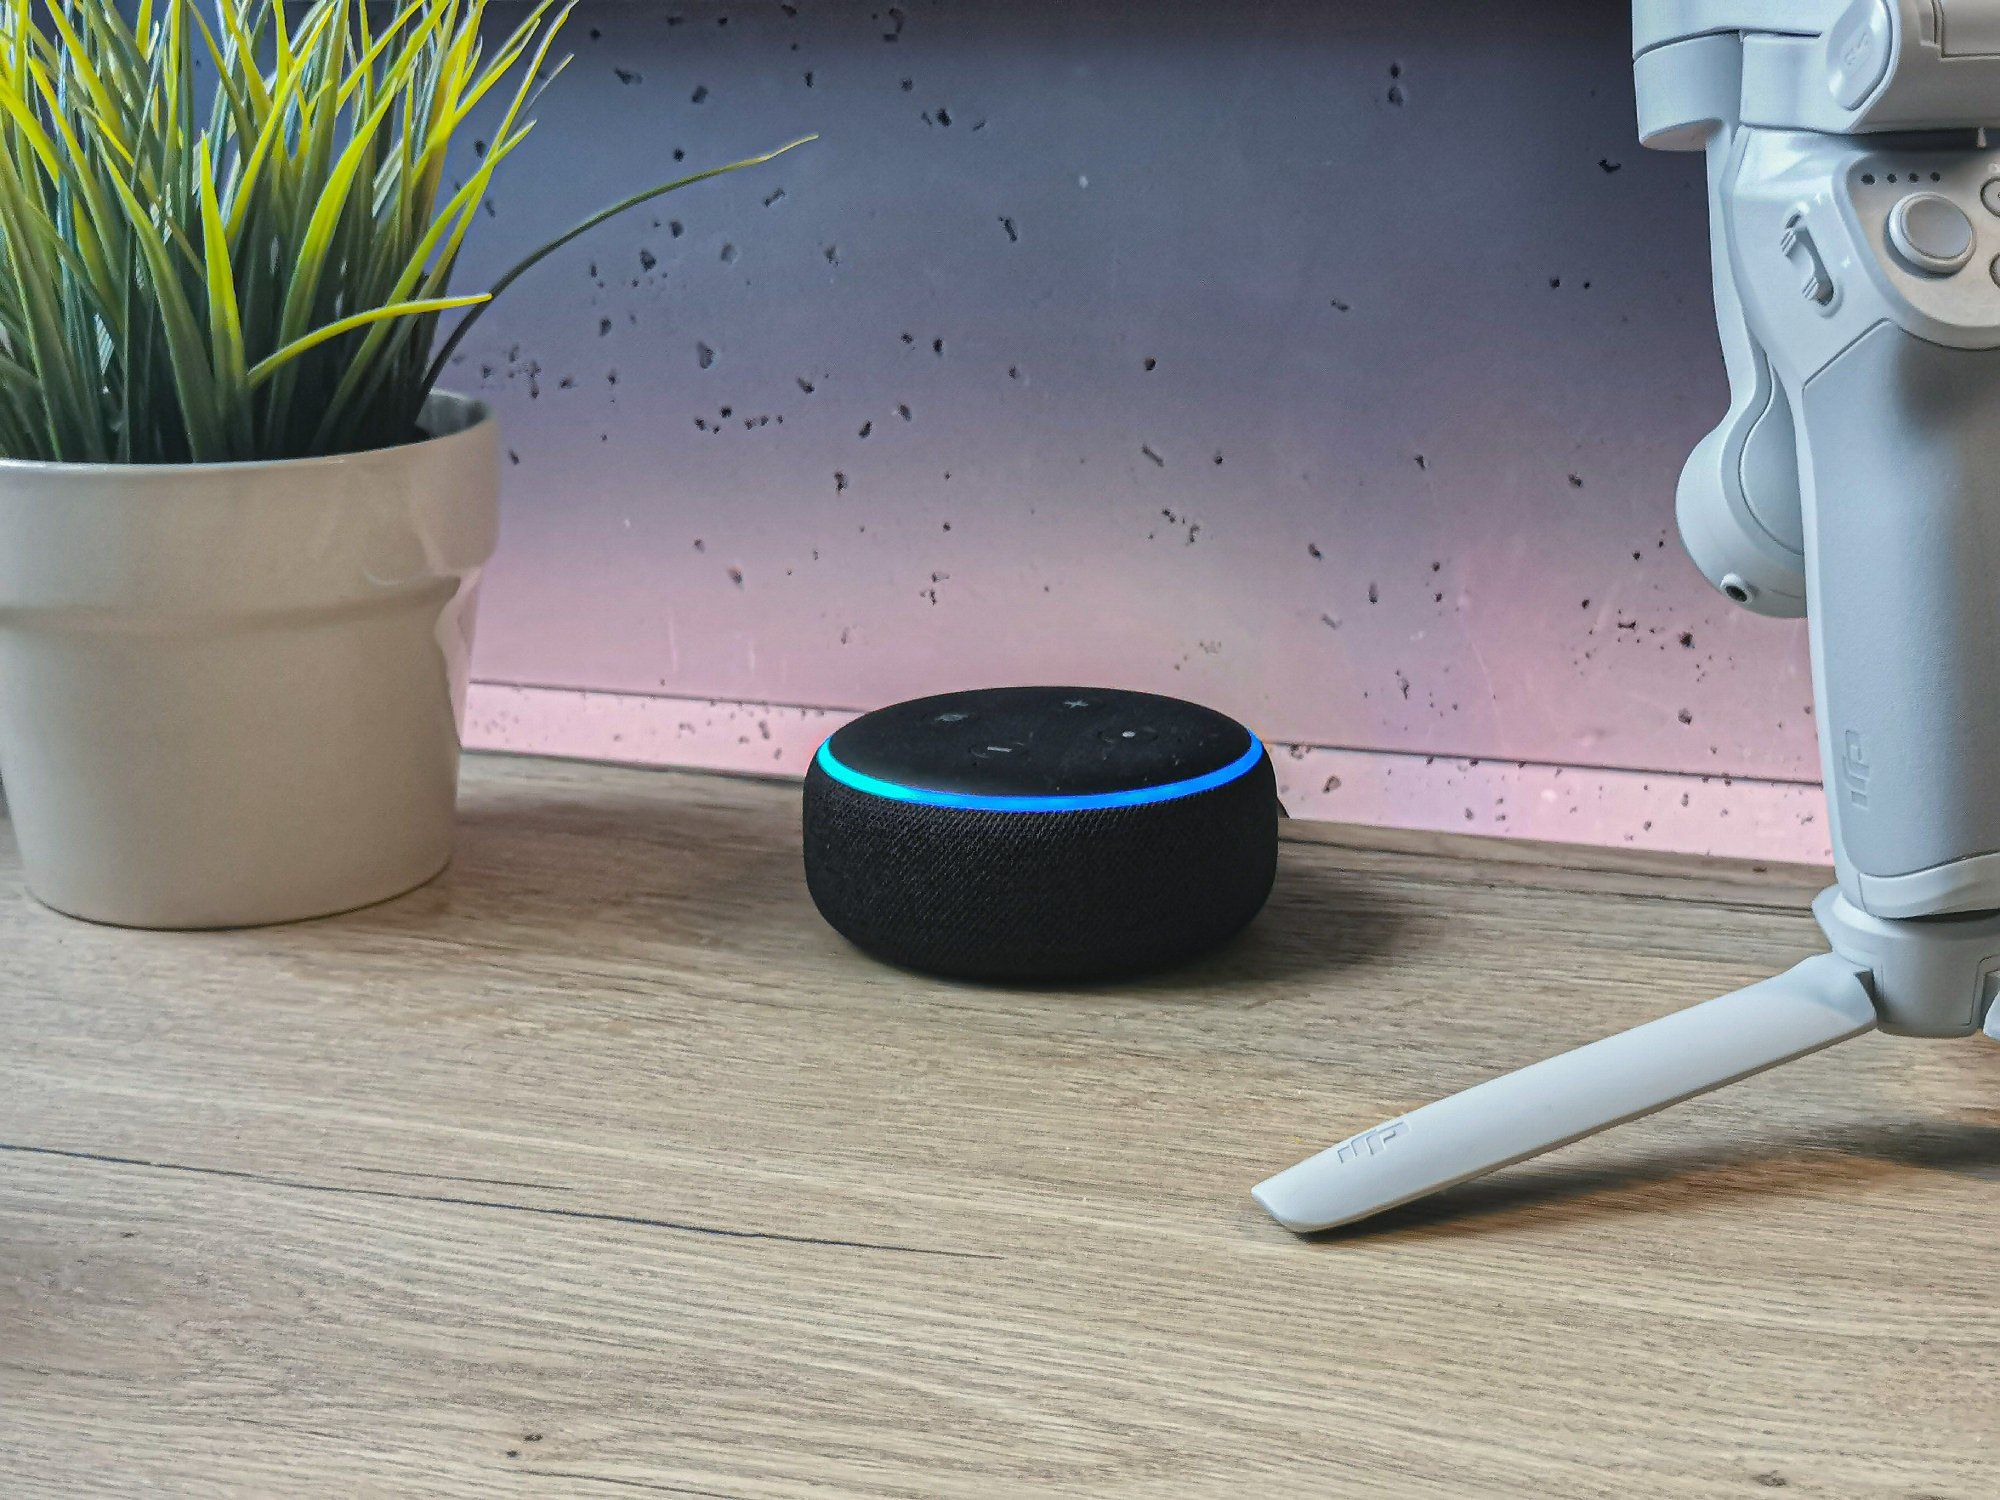 The Amazon Echo Dot as an important part of a home office